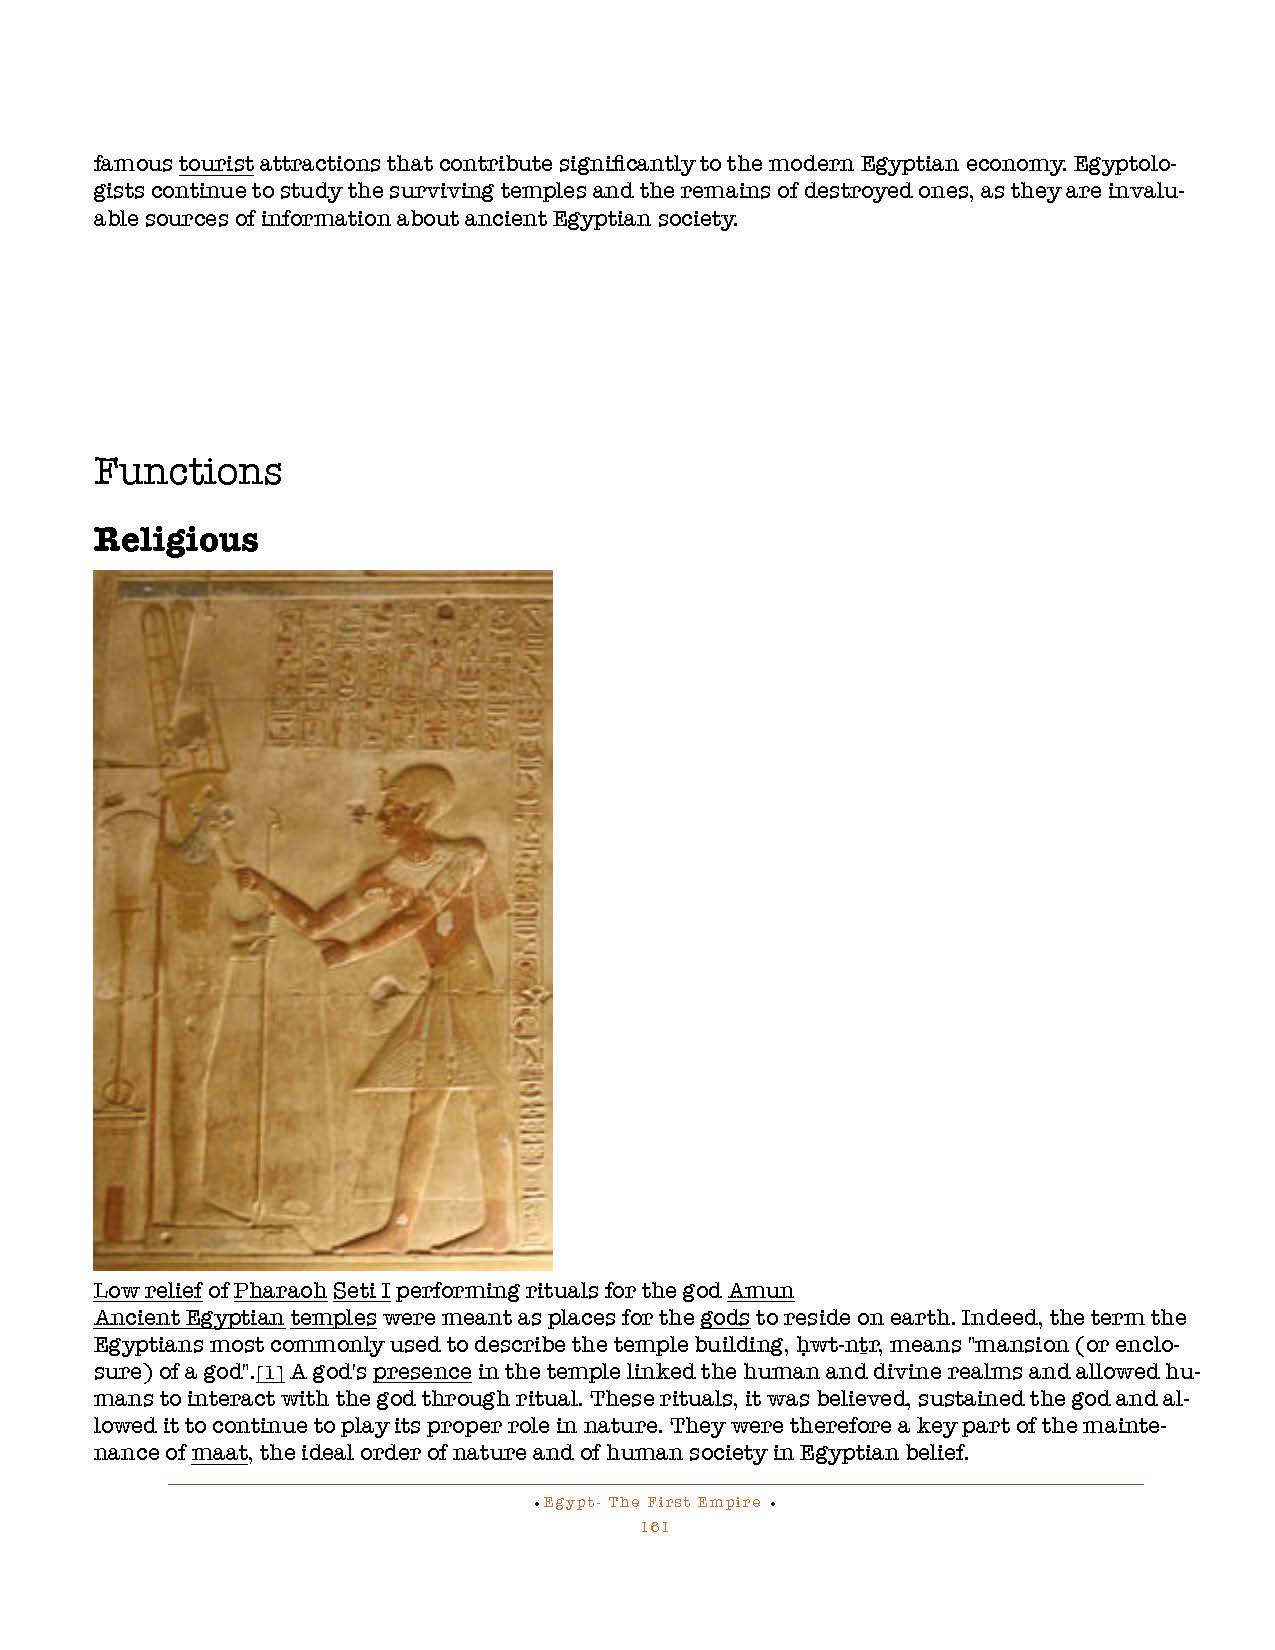 HOCE- Egypt  (First Empire) Notes_Page_161.jpg